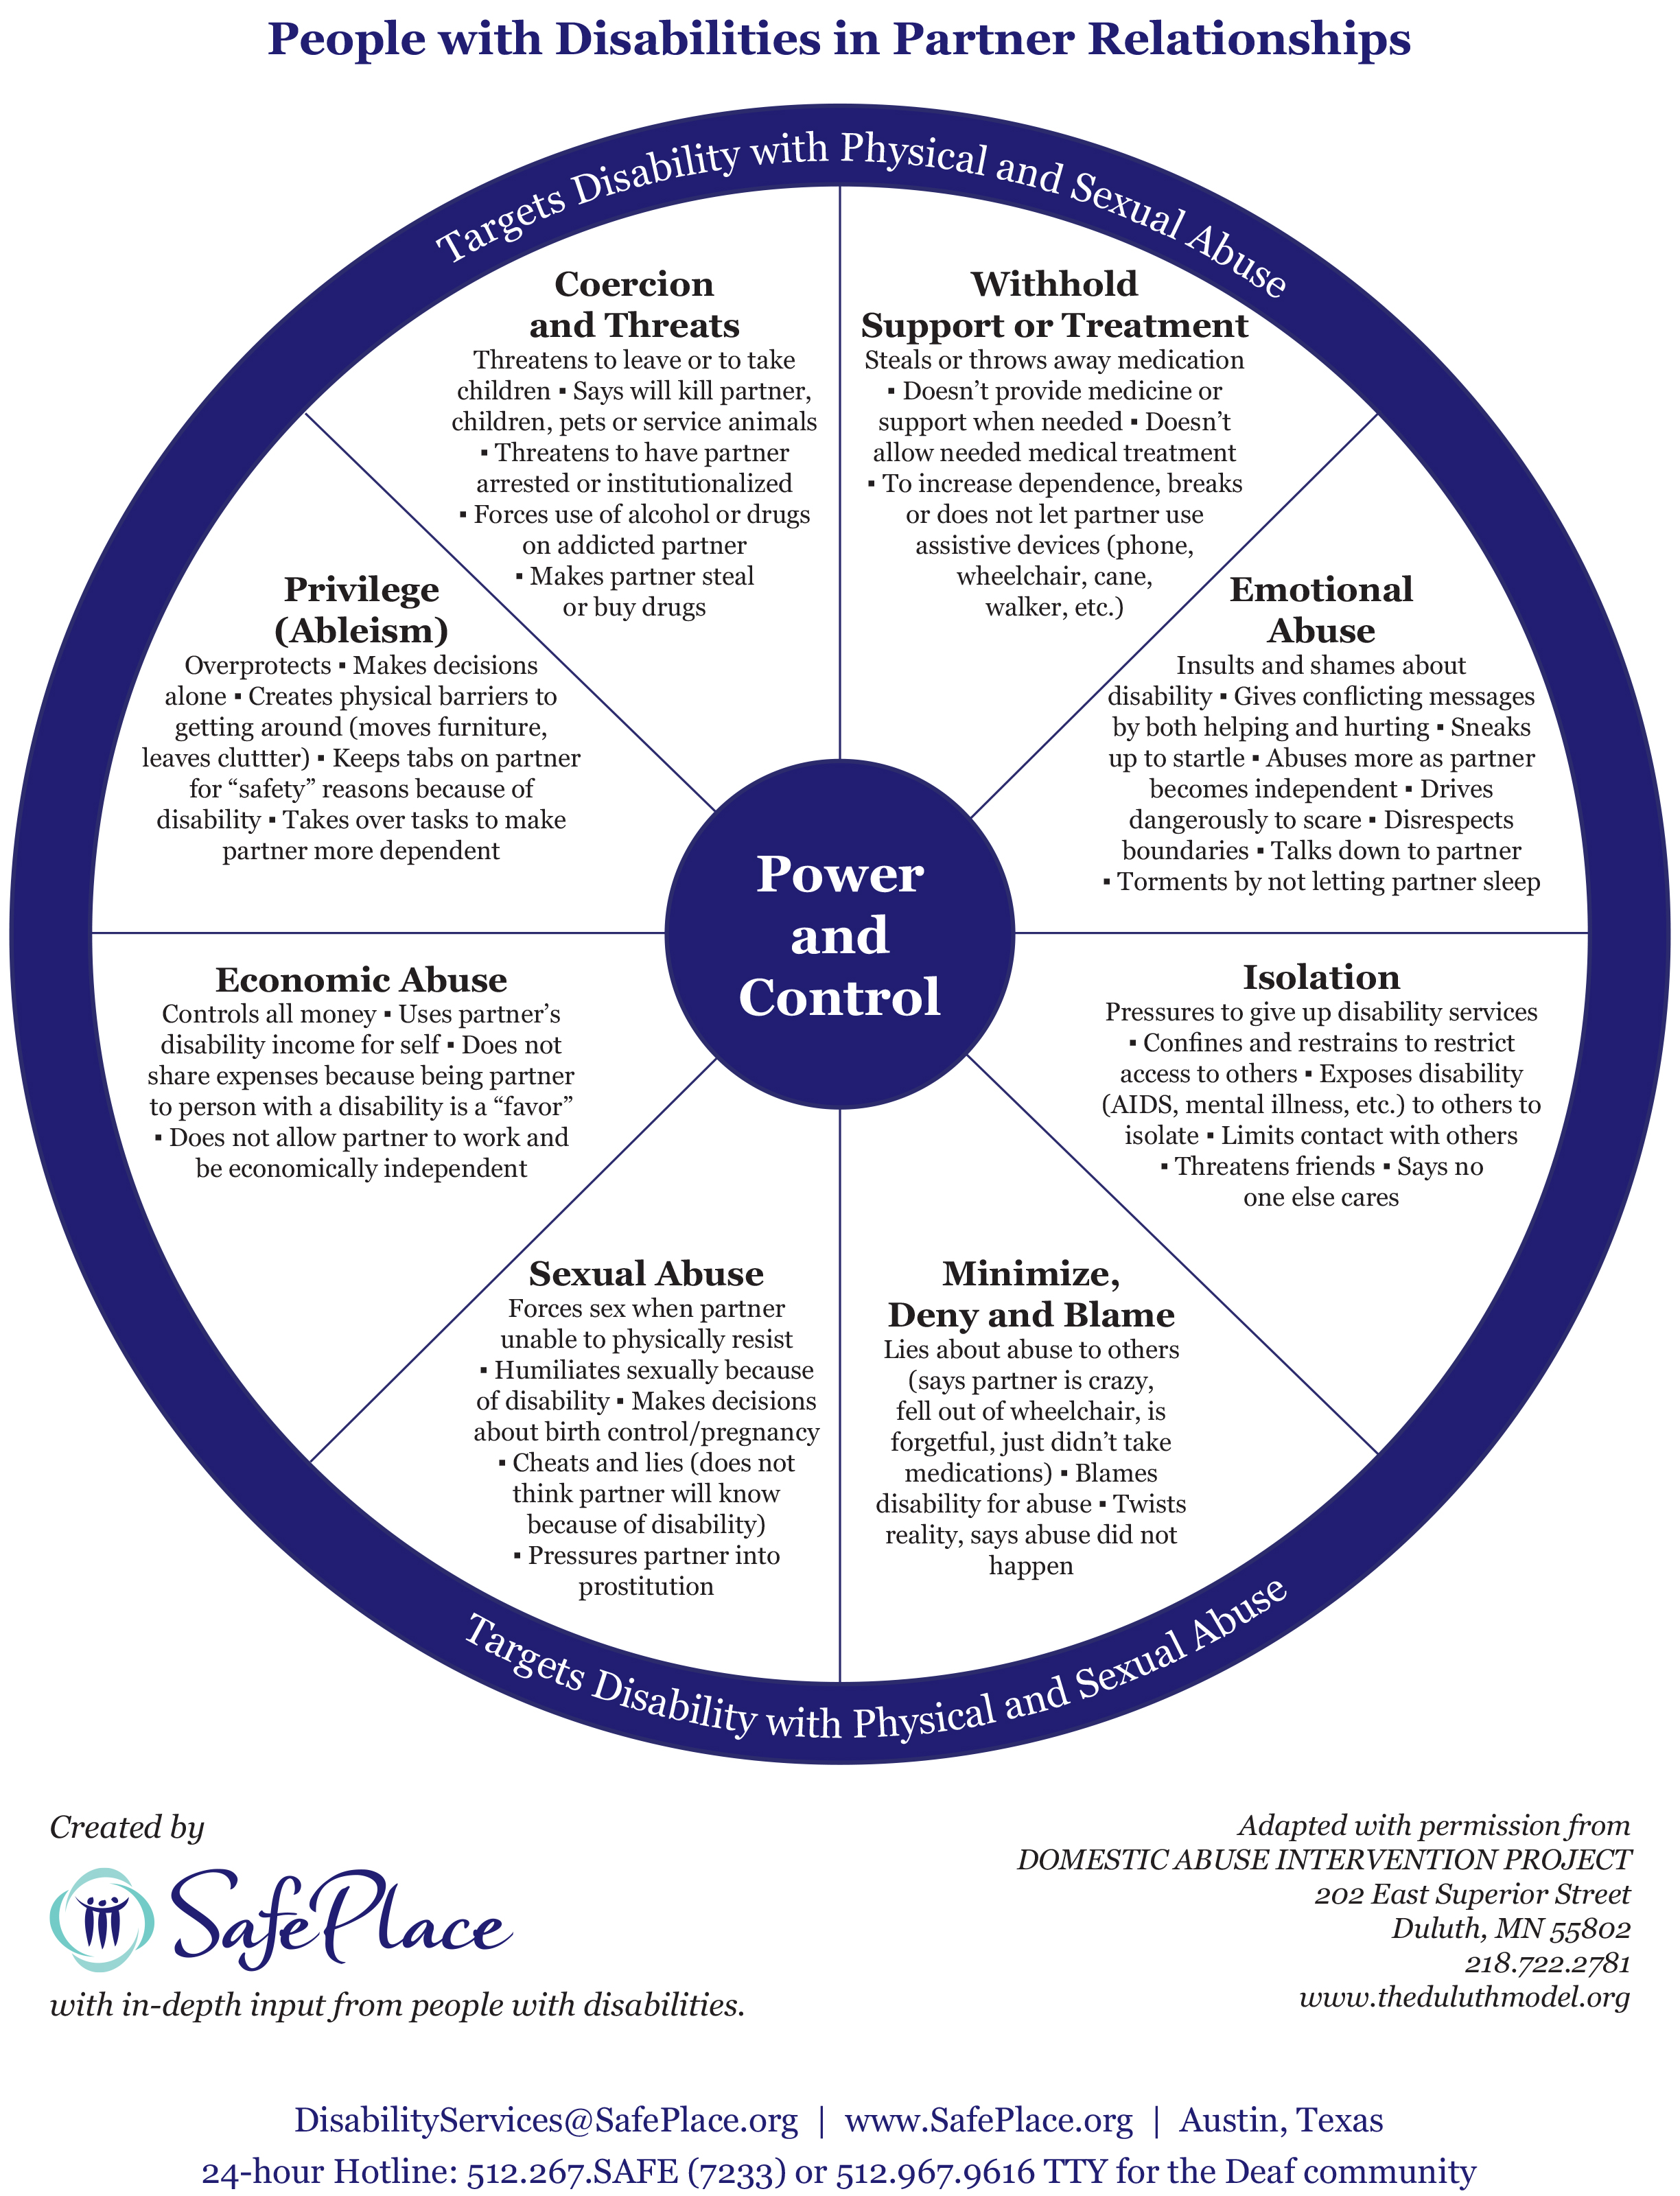 This power and control wheel shows examples of domestic violence against people with disabilities.